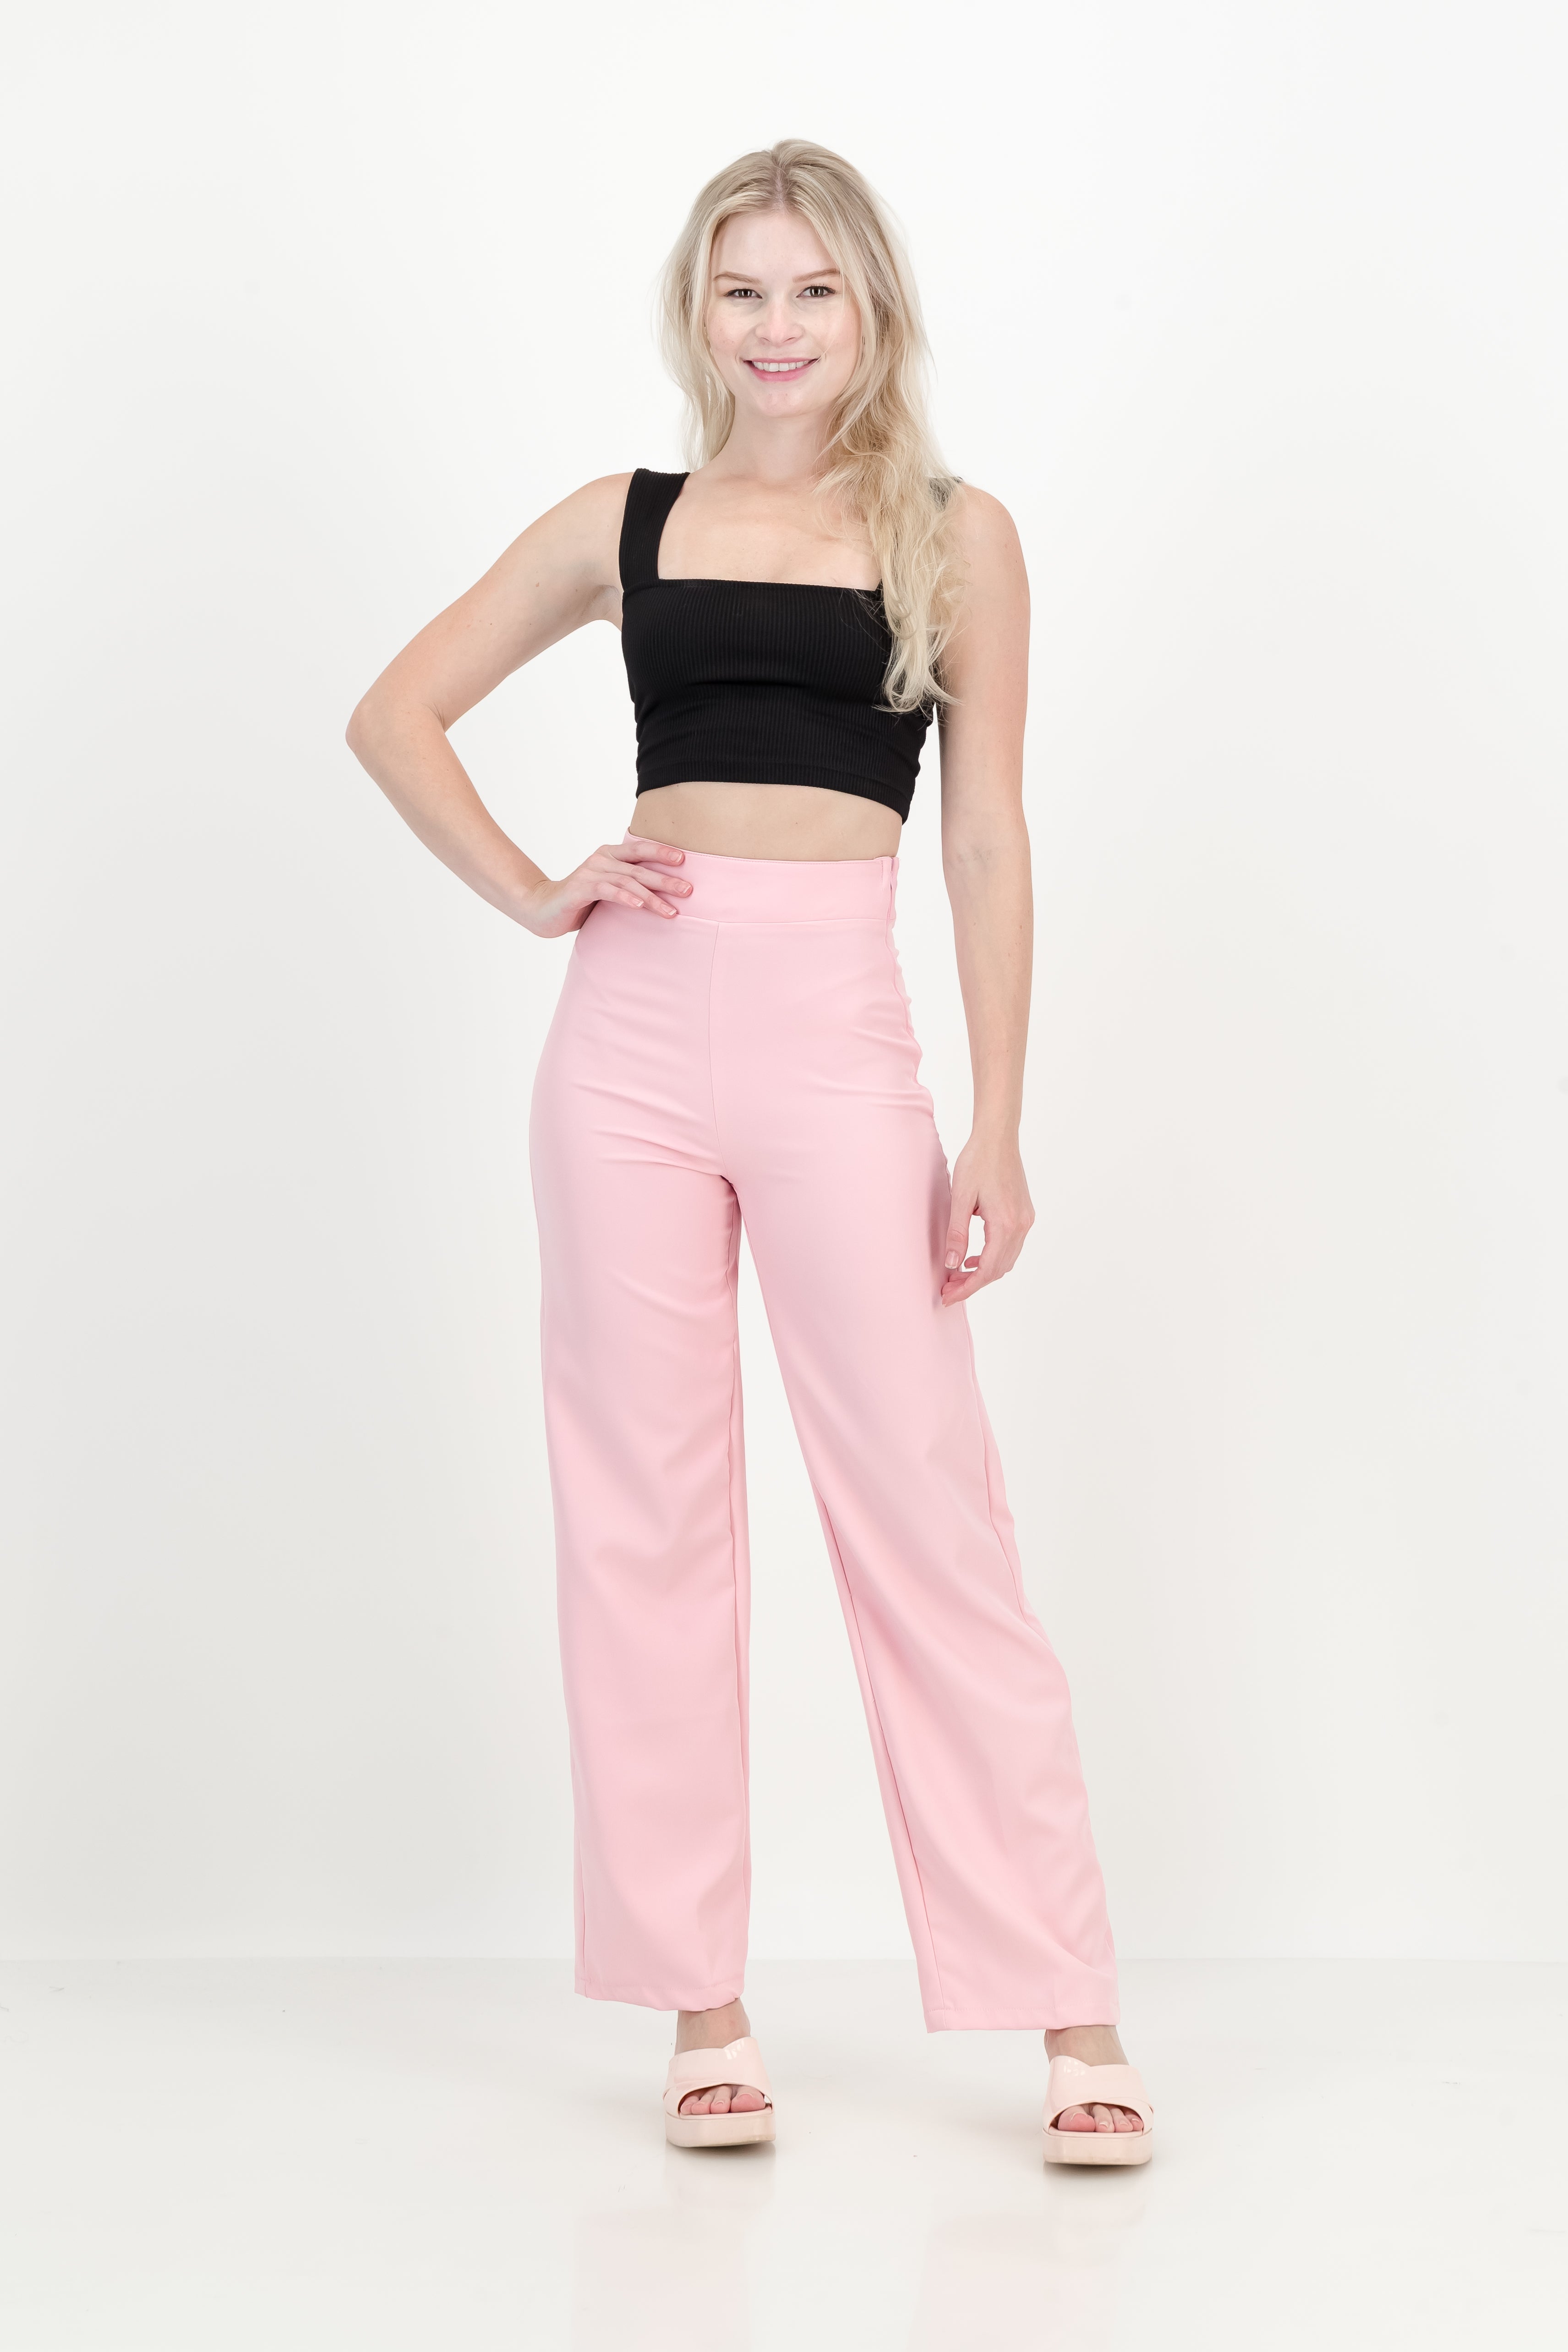 Buy NTX- Women's Cotton Flex Ankle Length Trouser Pants/Regular Pants for  Women (Combo, Pack of 2) F-17+18_Fawn+Baby Pink at Amazon.in